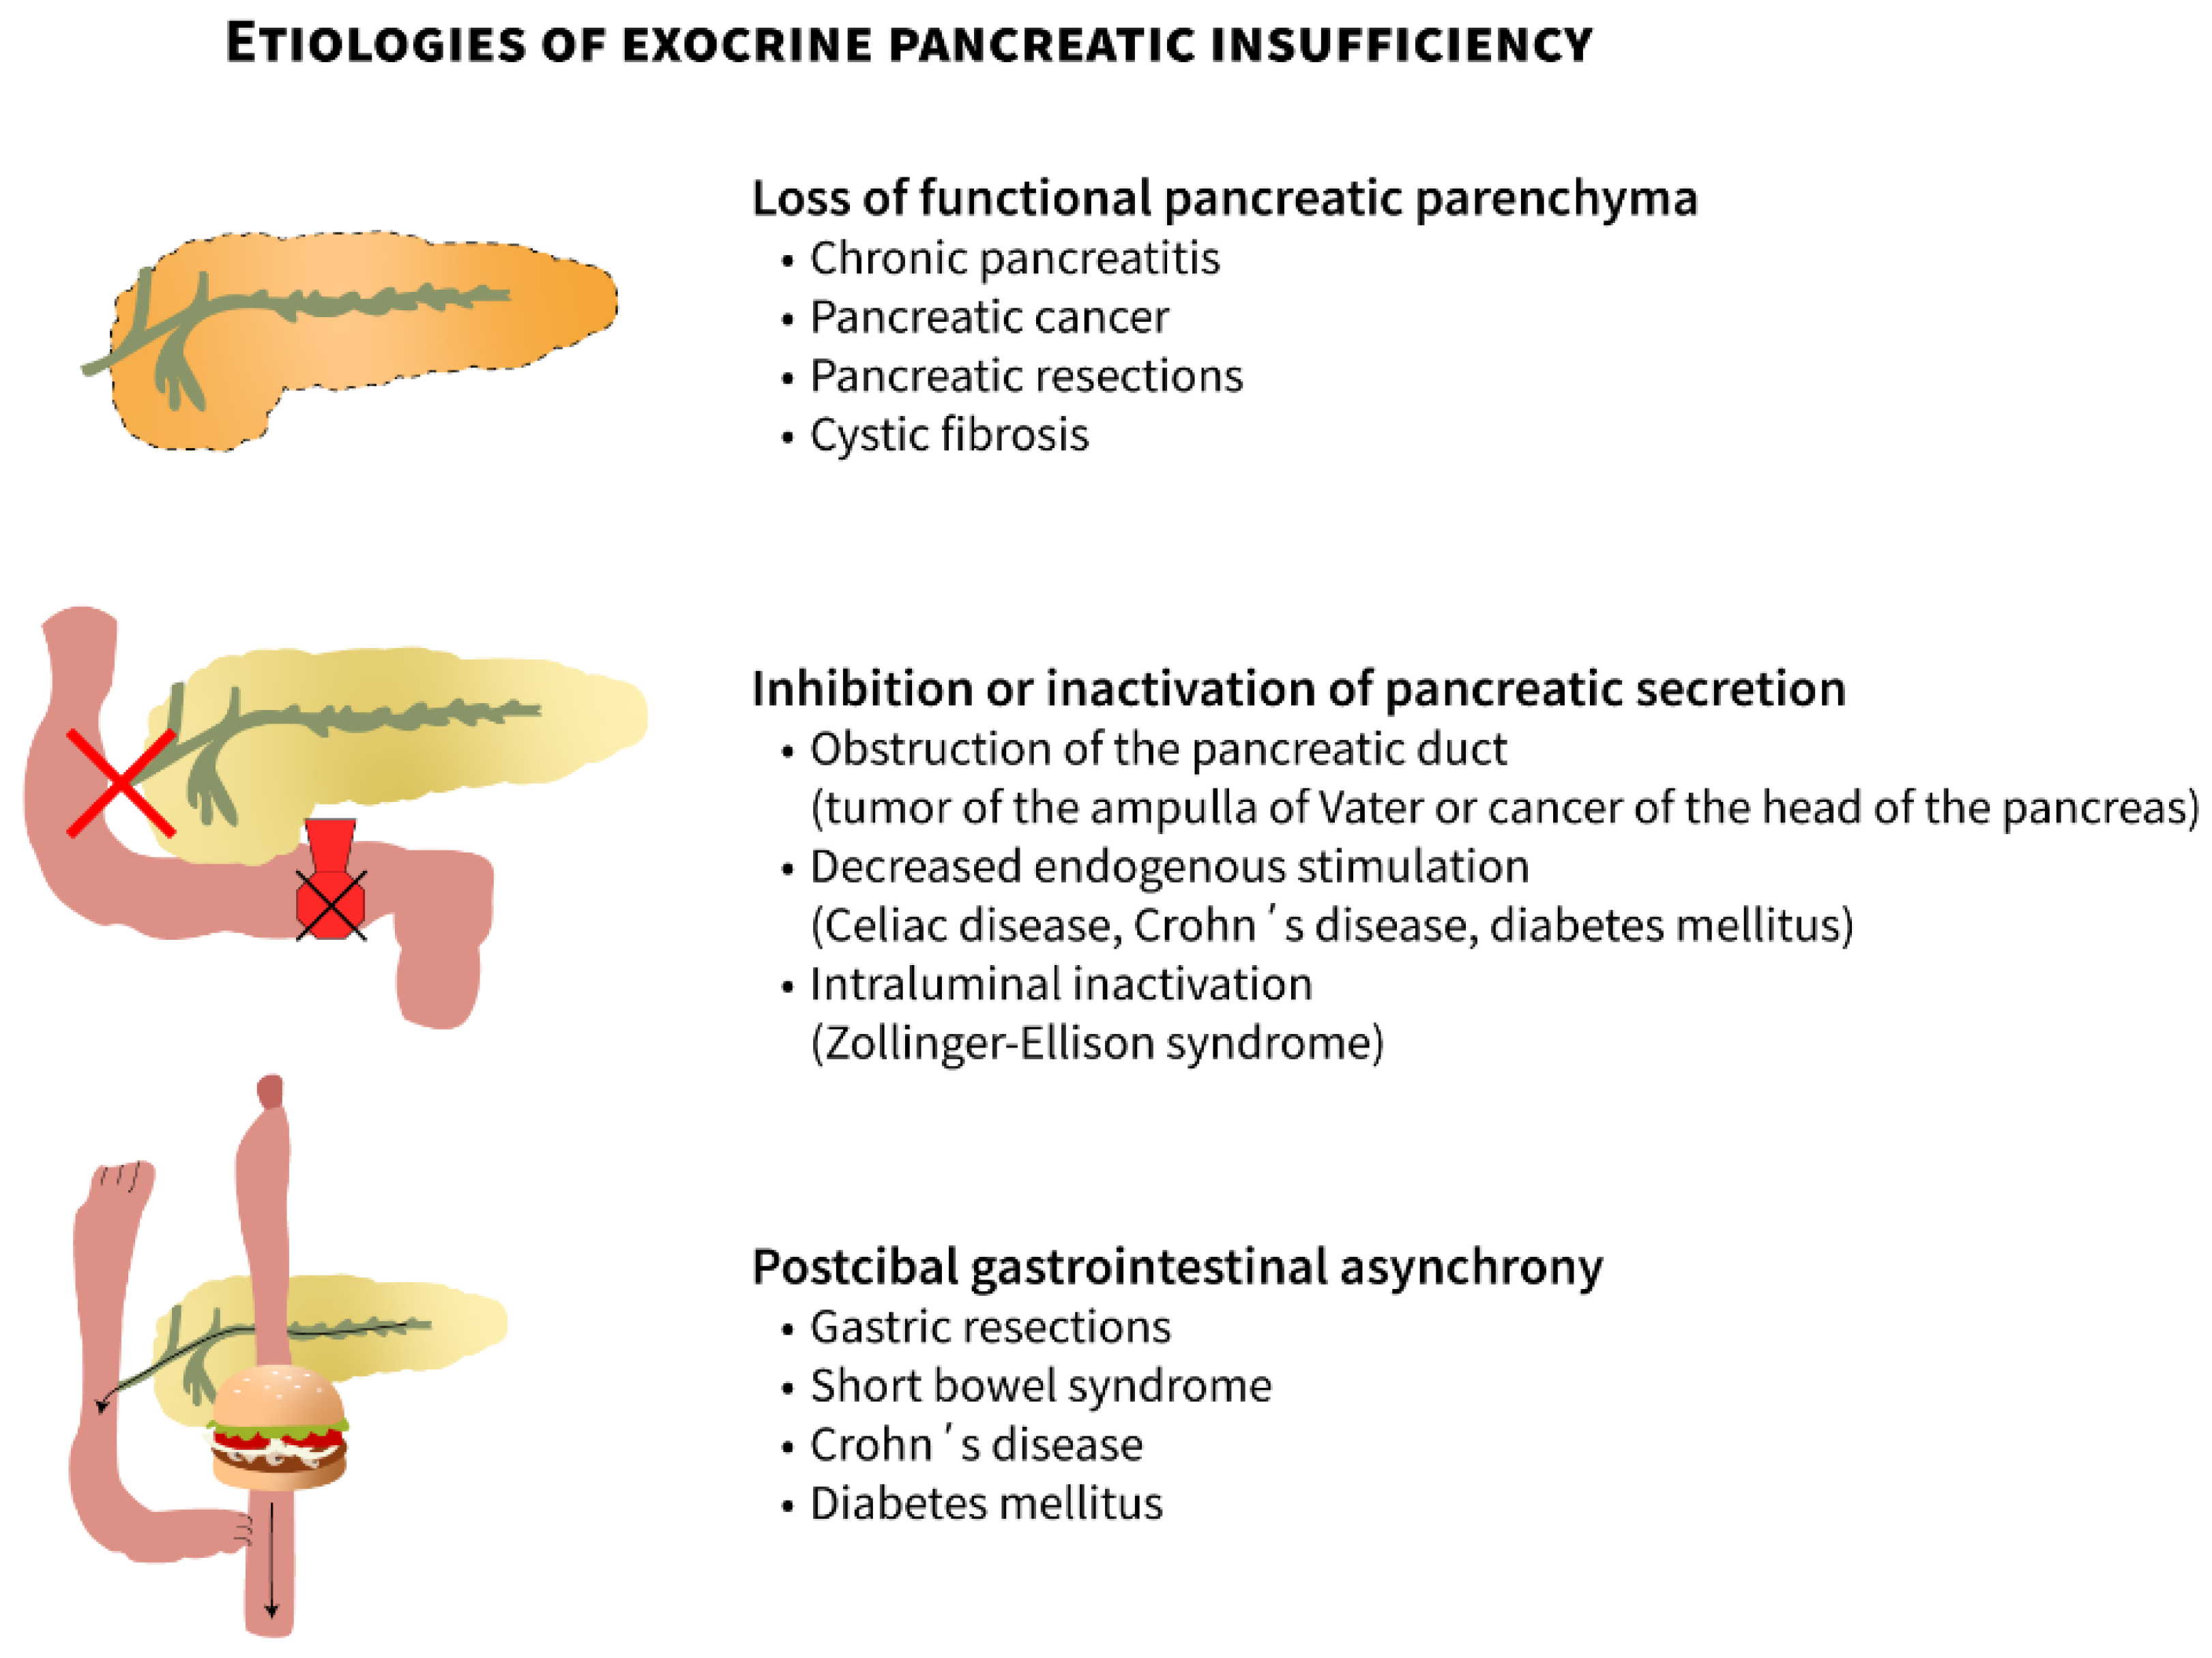 JCM | Free Full-Text | Causes of Exocrine Pancreatic Insufficiency Other  Than Chronic Pancreatitis | HTML